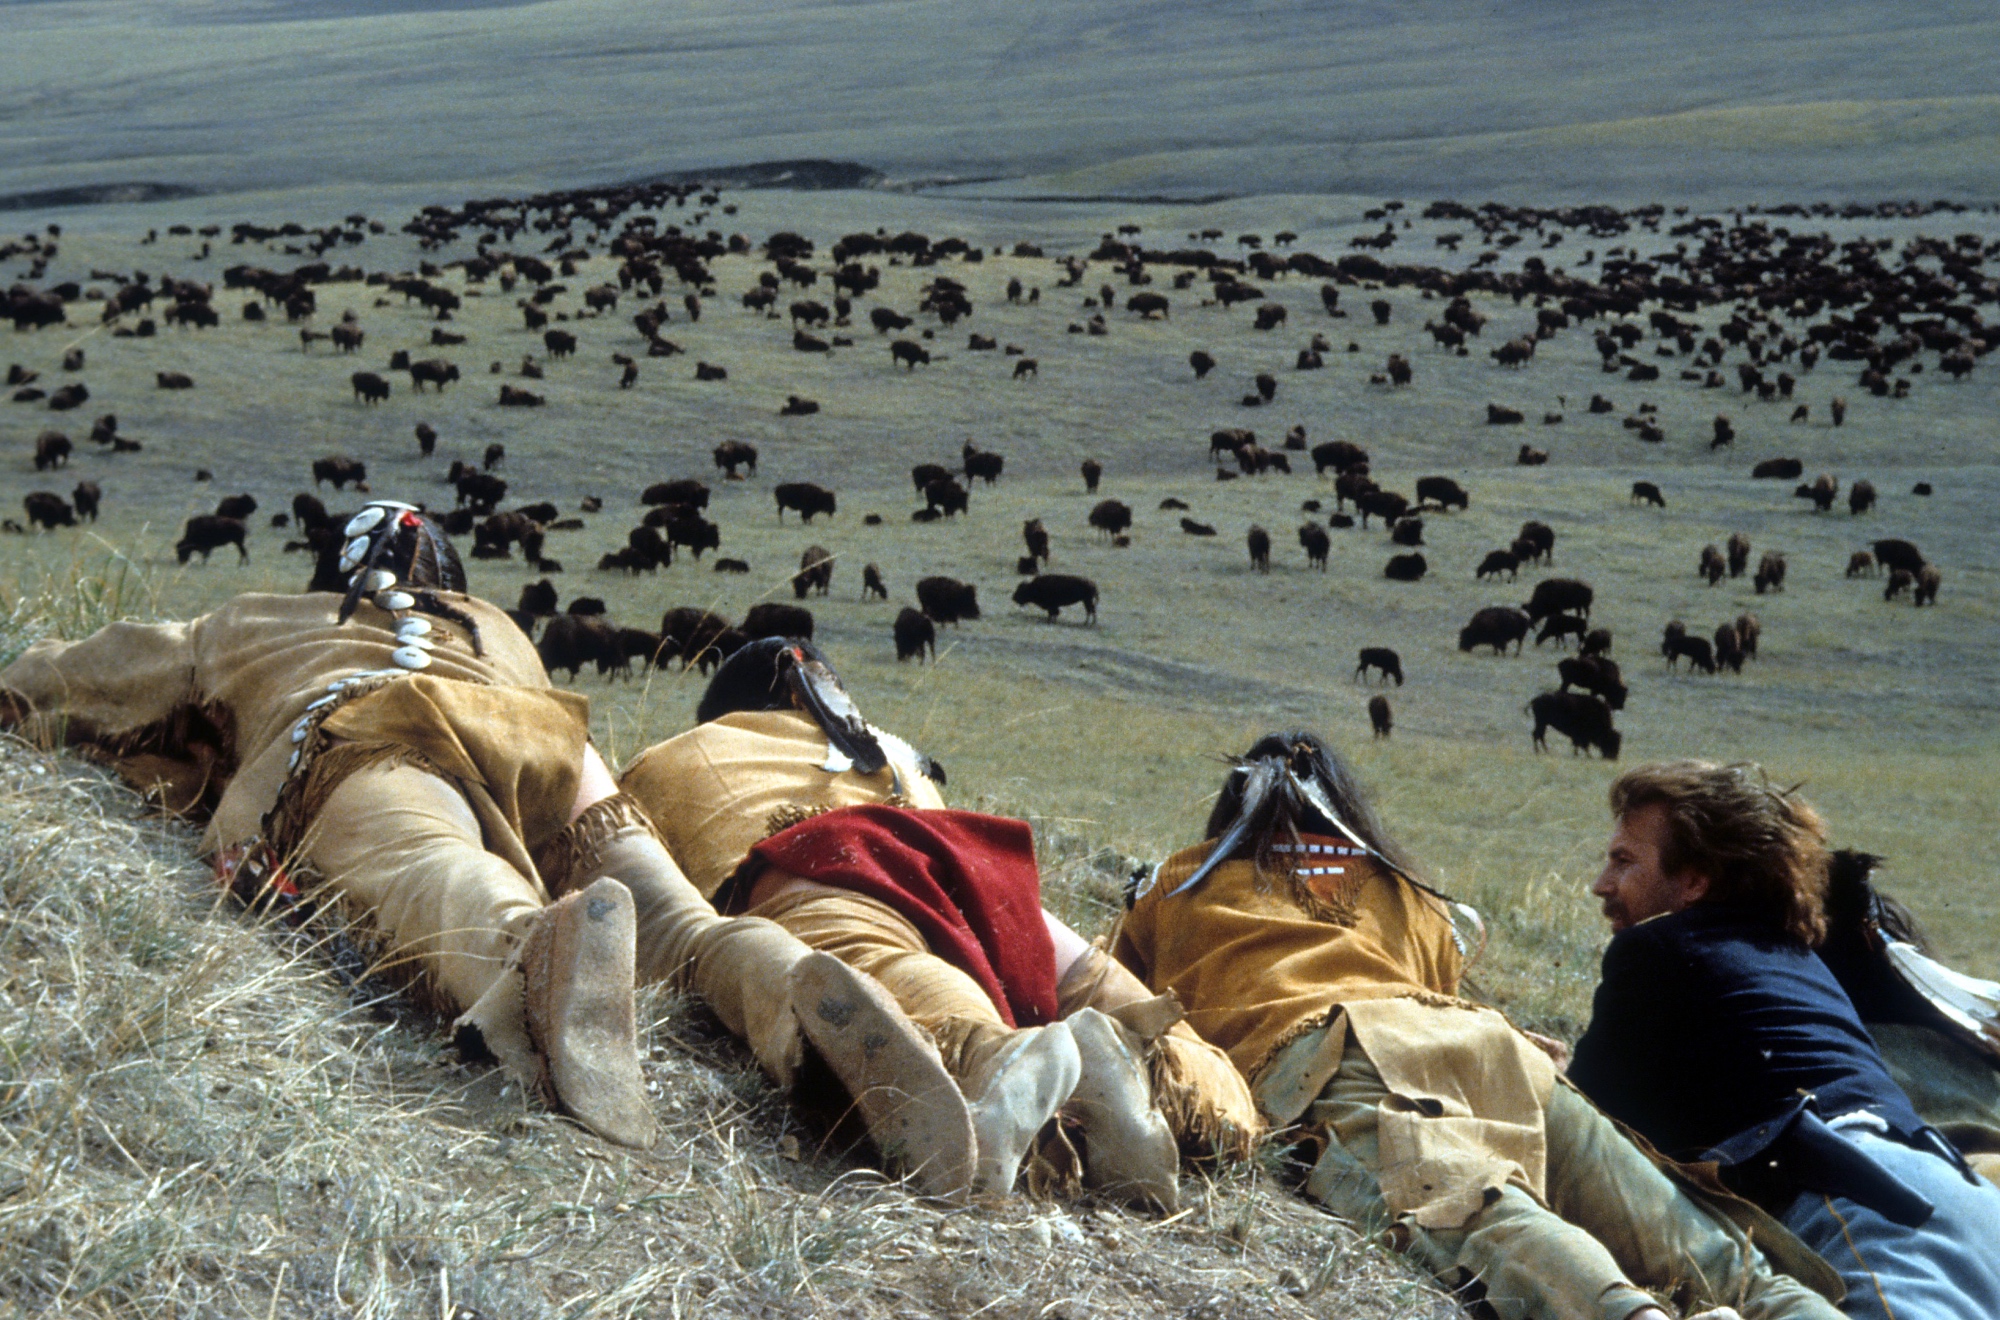 Kevin Costner as John Dunbar with Sioux Indians in 'Dances With Wolves' laying on the the hill observing the buffalo